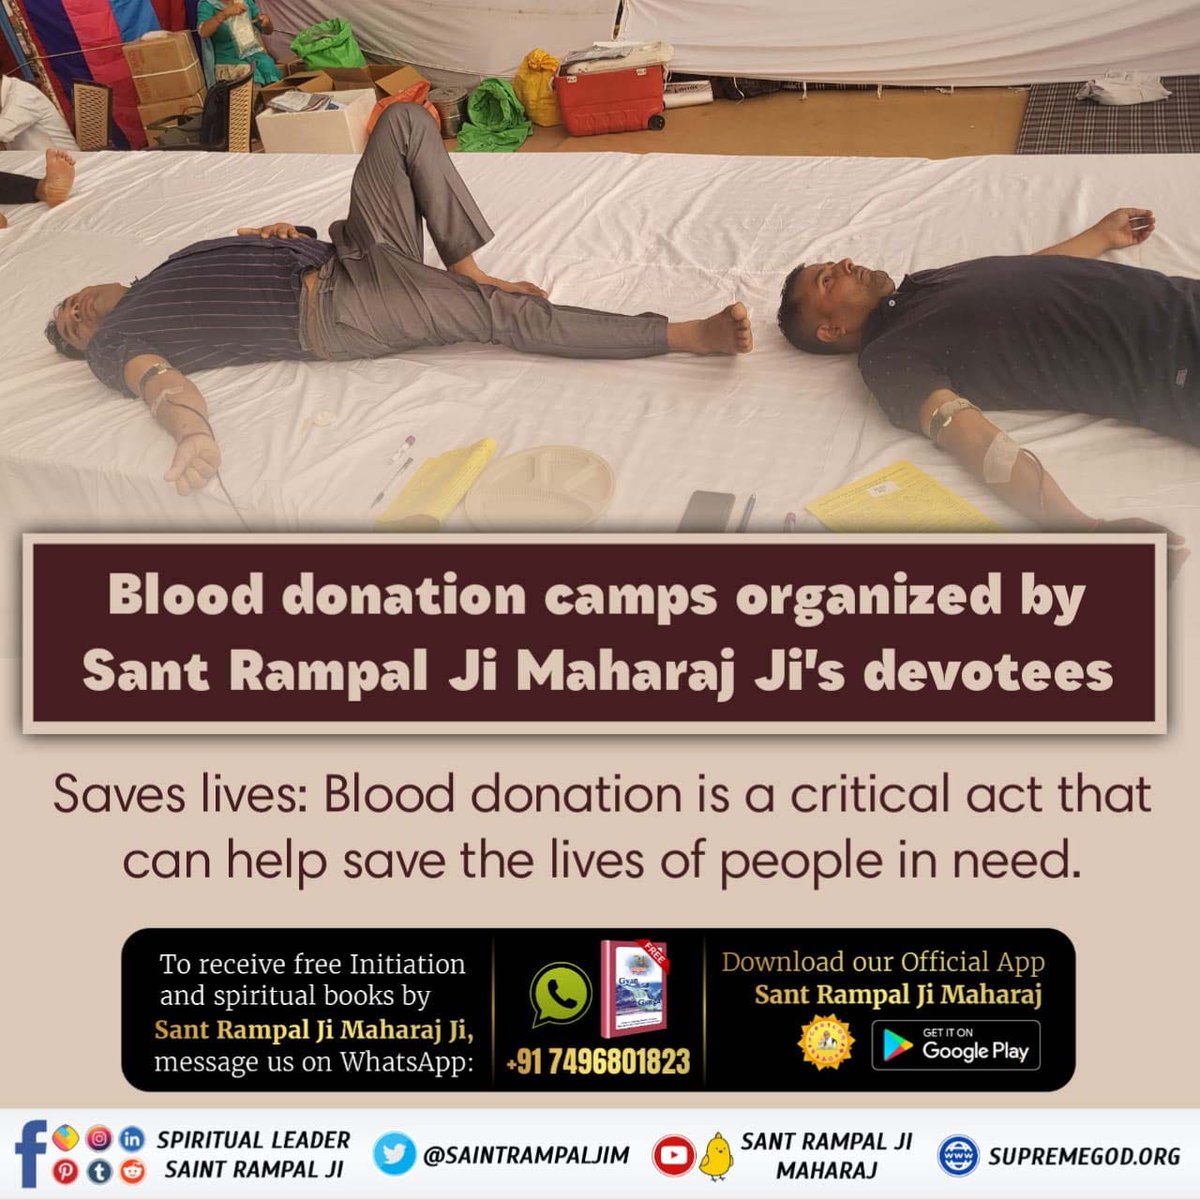 #SaveLives_DonateBlood
Blood donation camps organized by Sant Rampal Ji Maharaj Ji's devotees
✨✨✨
Saves lives: Blood donation is a critical act that can help save the lives of people in need.
#GodMorningWednesday